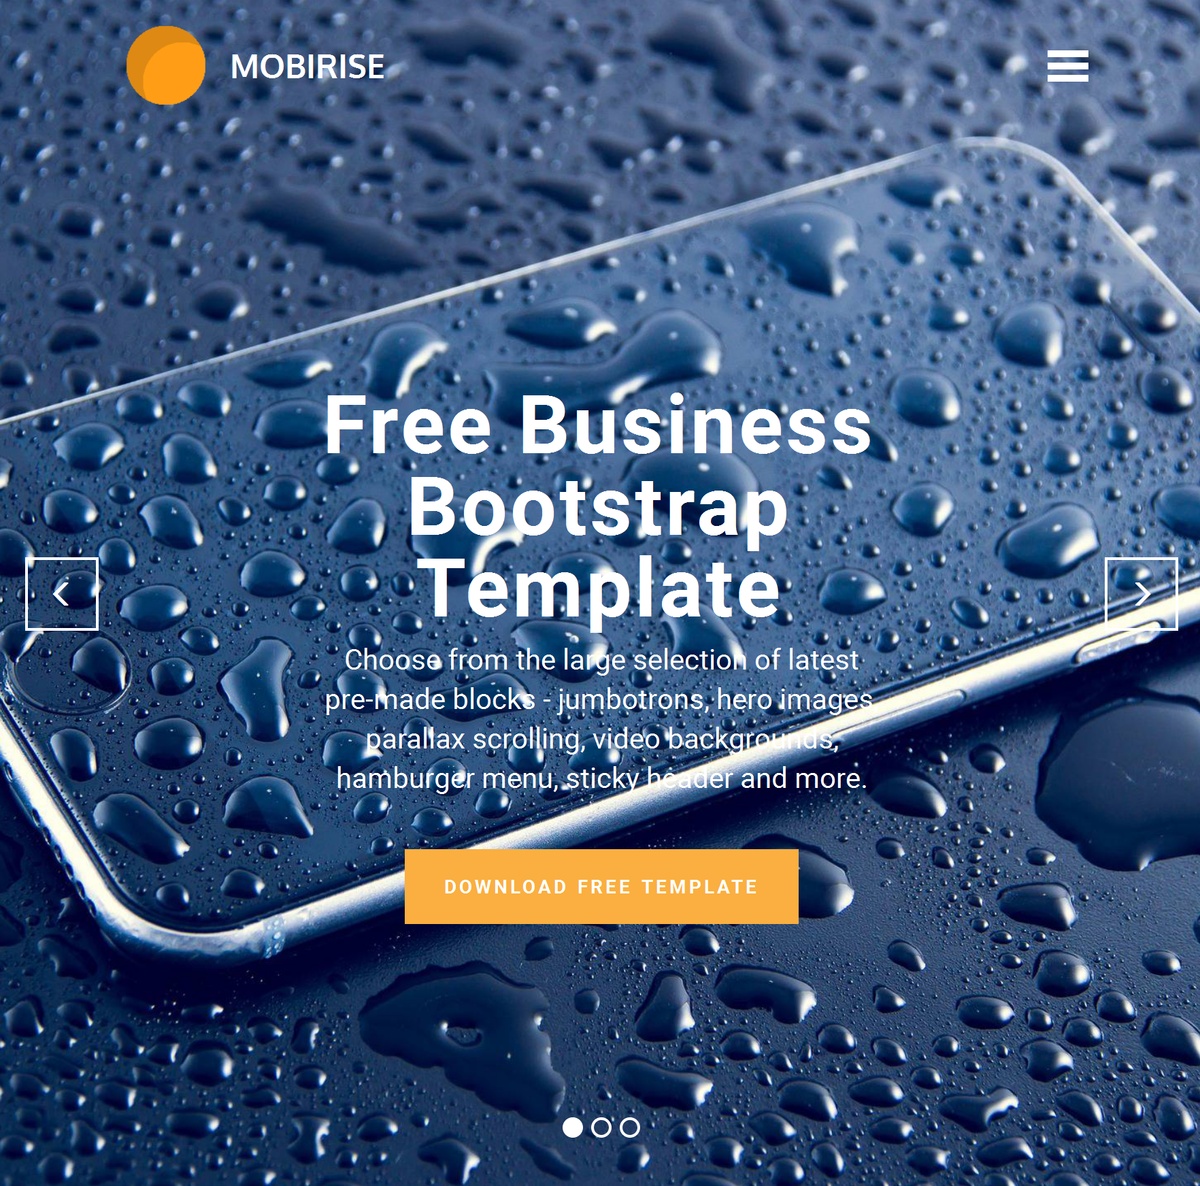  Responsive Web Templates Themes Extensions